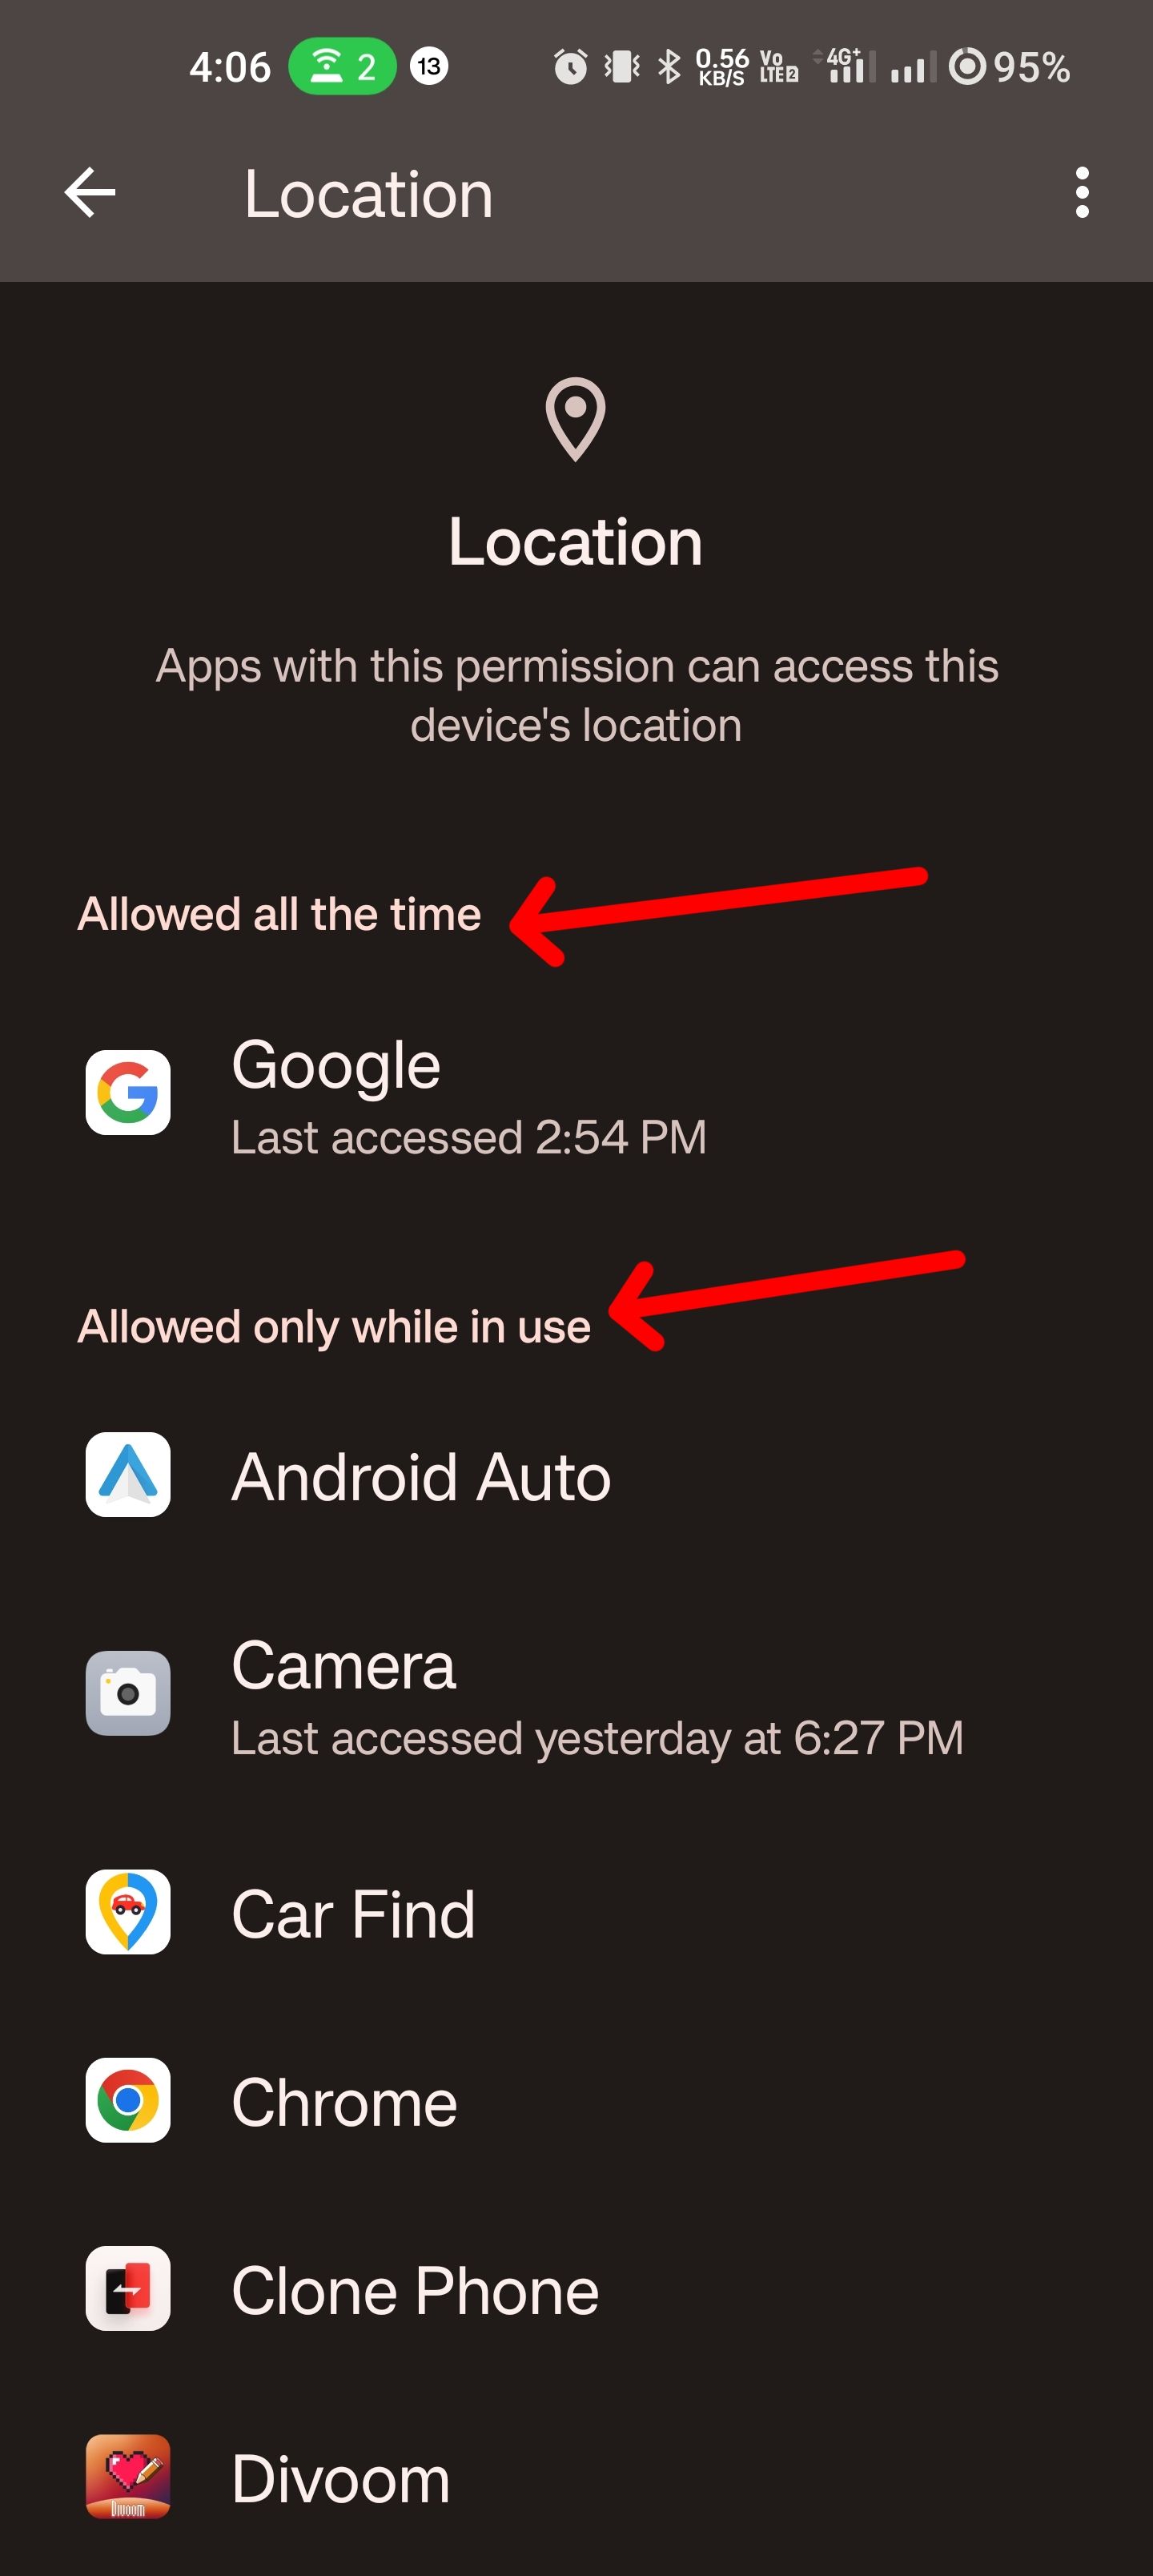 Click on an app in one of these two sections to change its location access permissions.